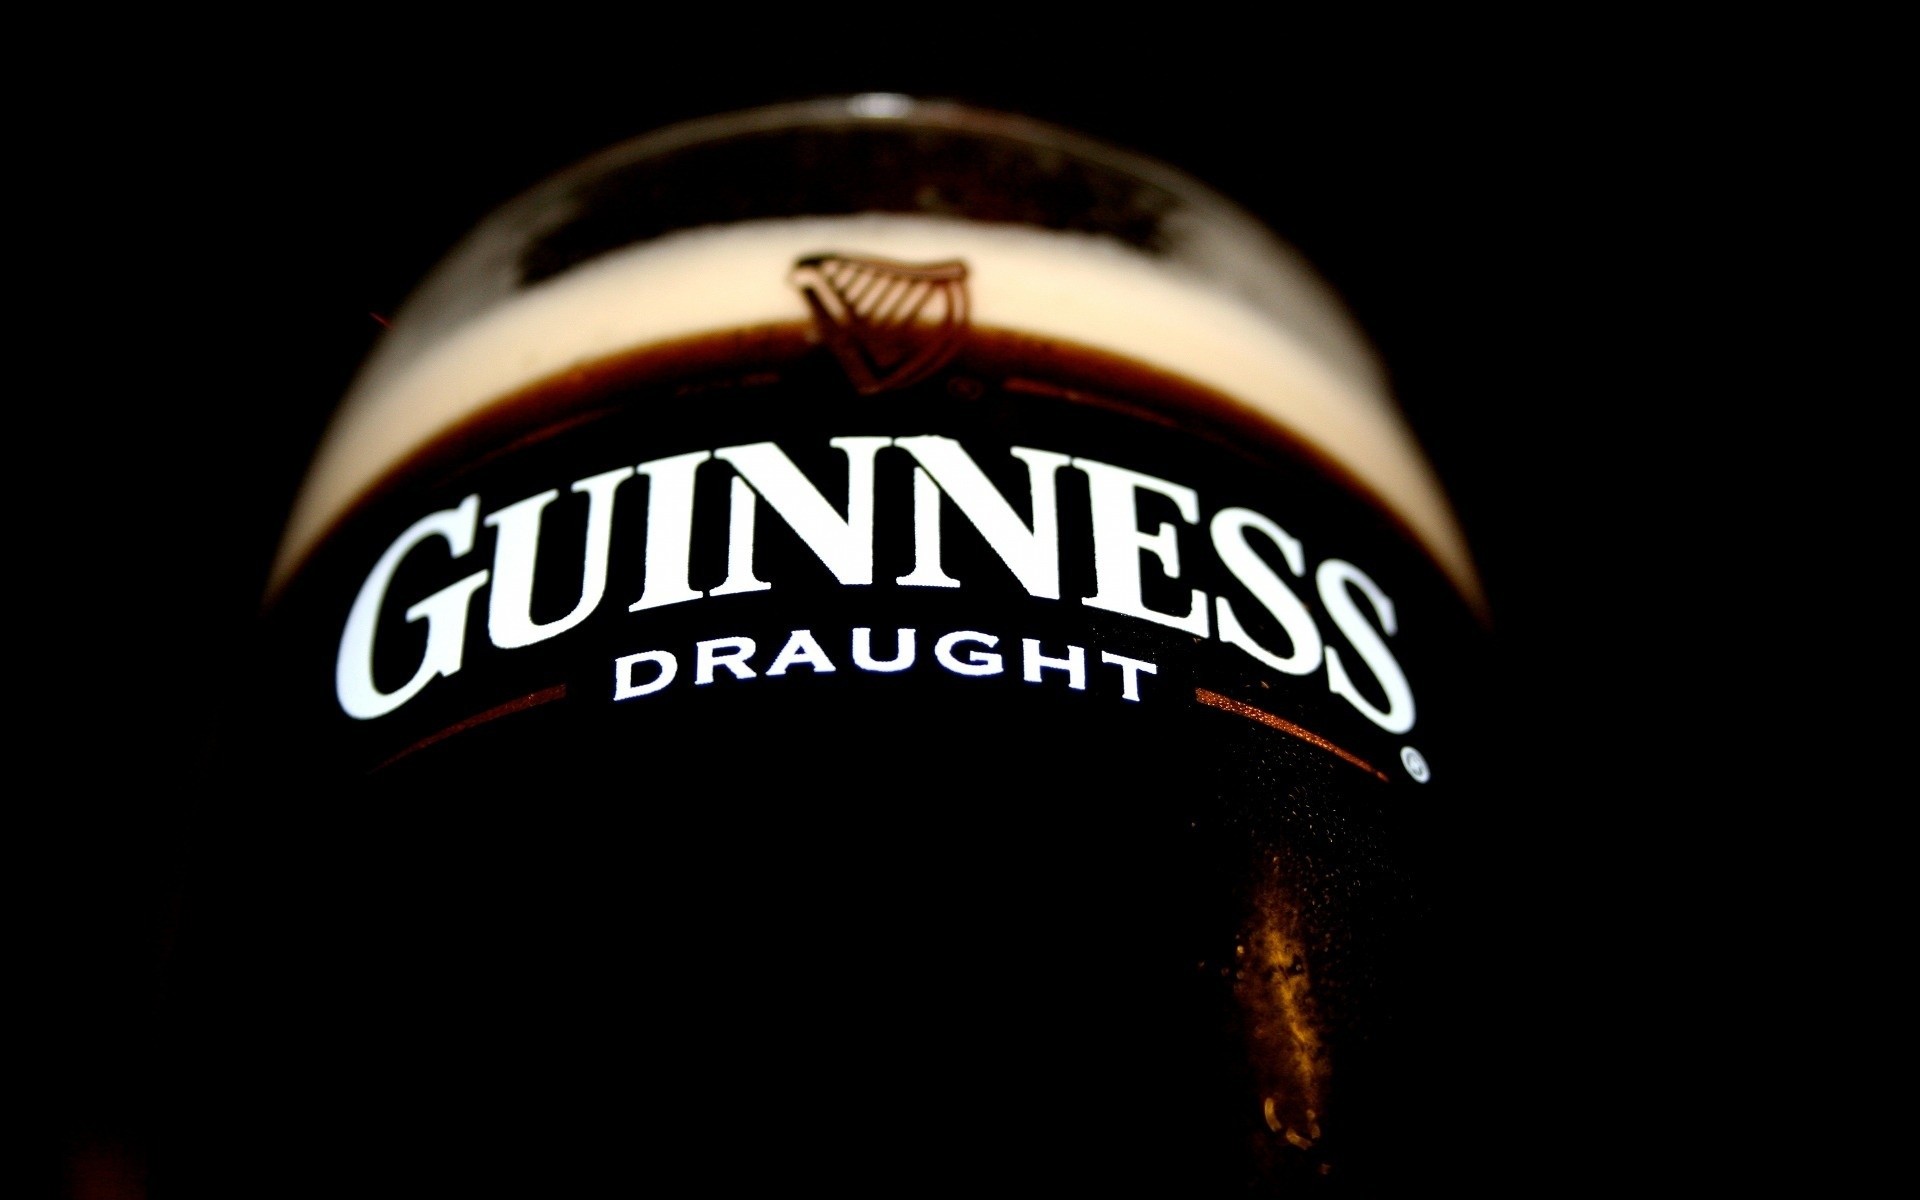 Guinness beer wallpapers55.com – Best Wallpapers for PCs, Laptops